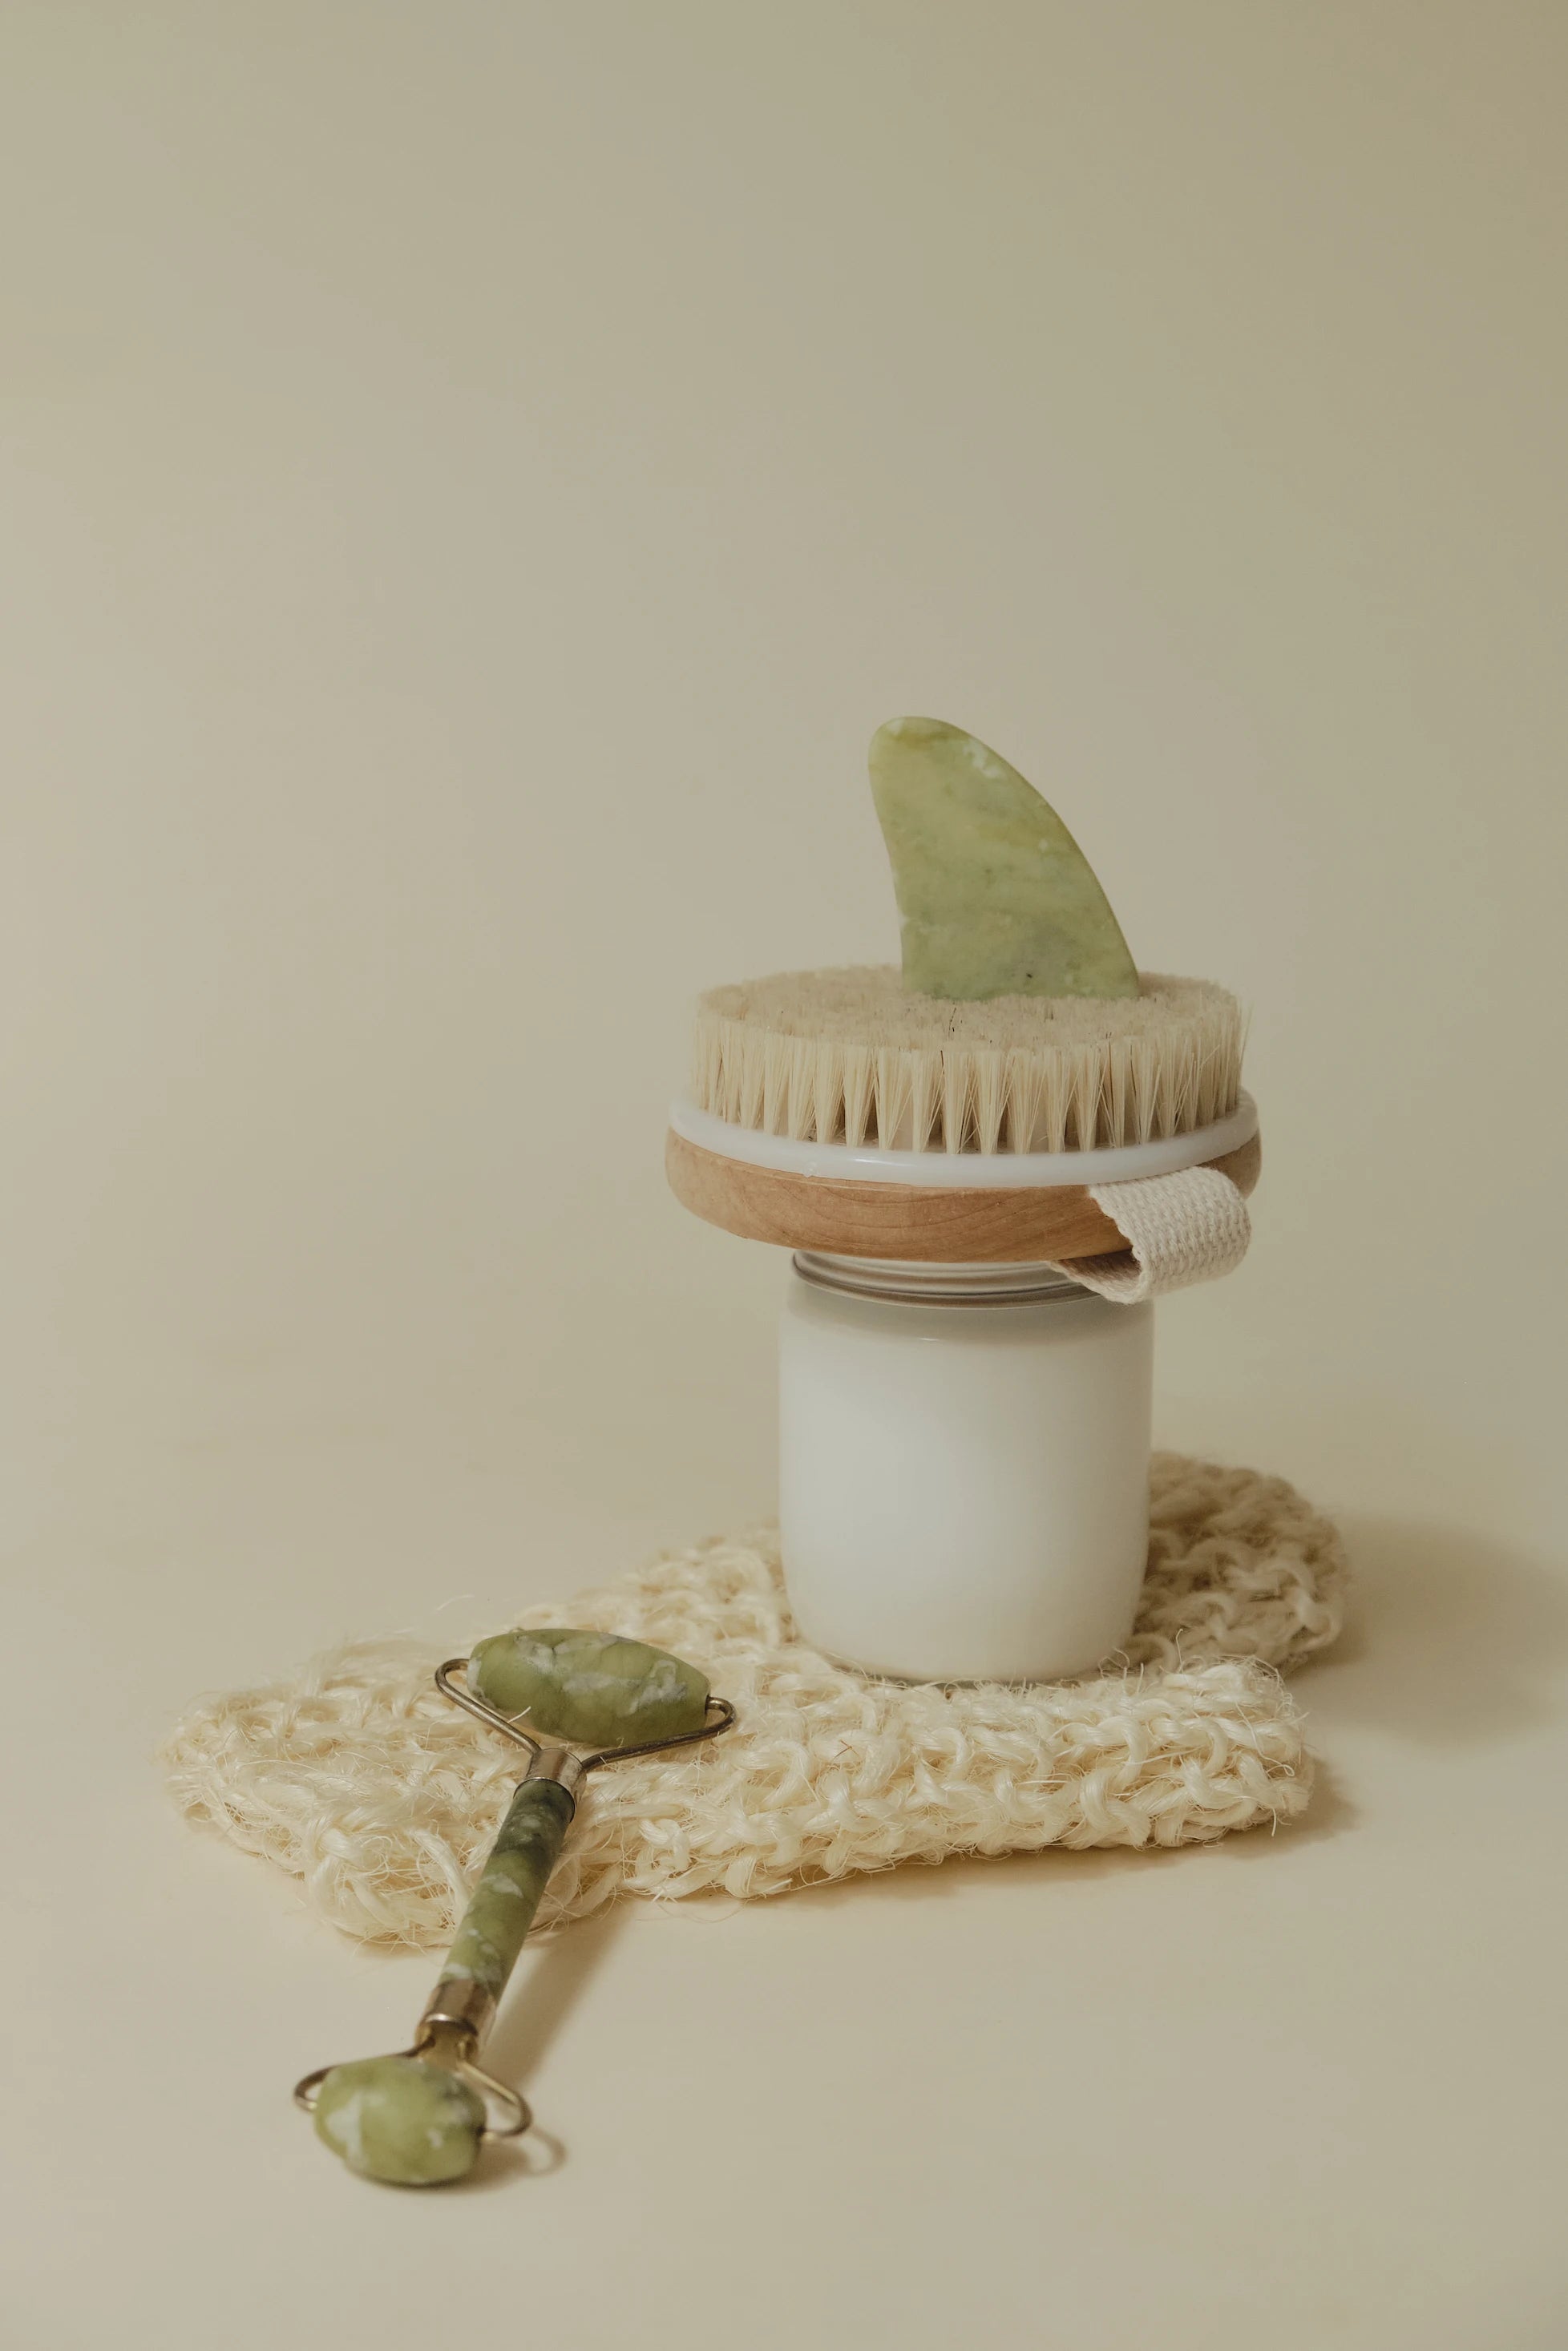 An image of a dry body brush and a green facial roller